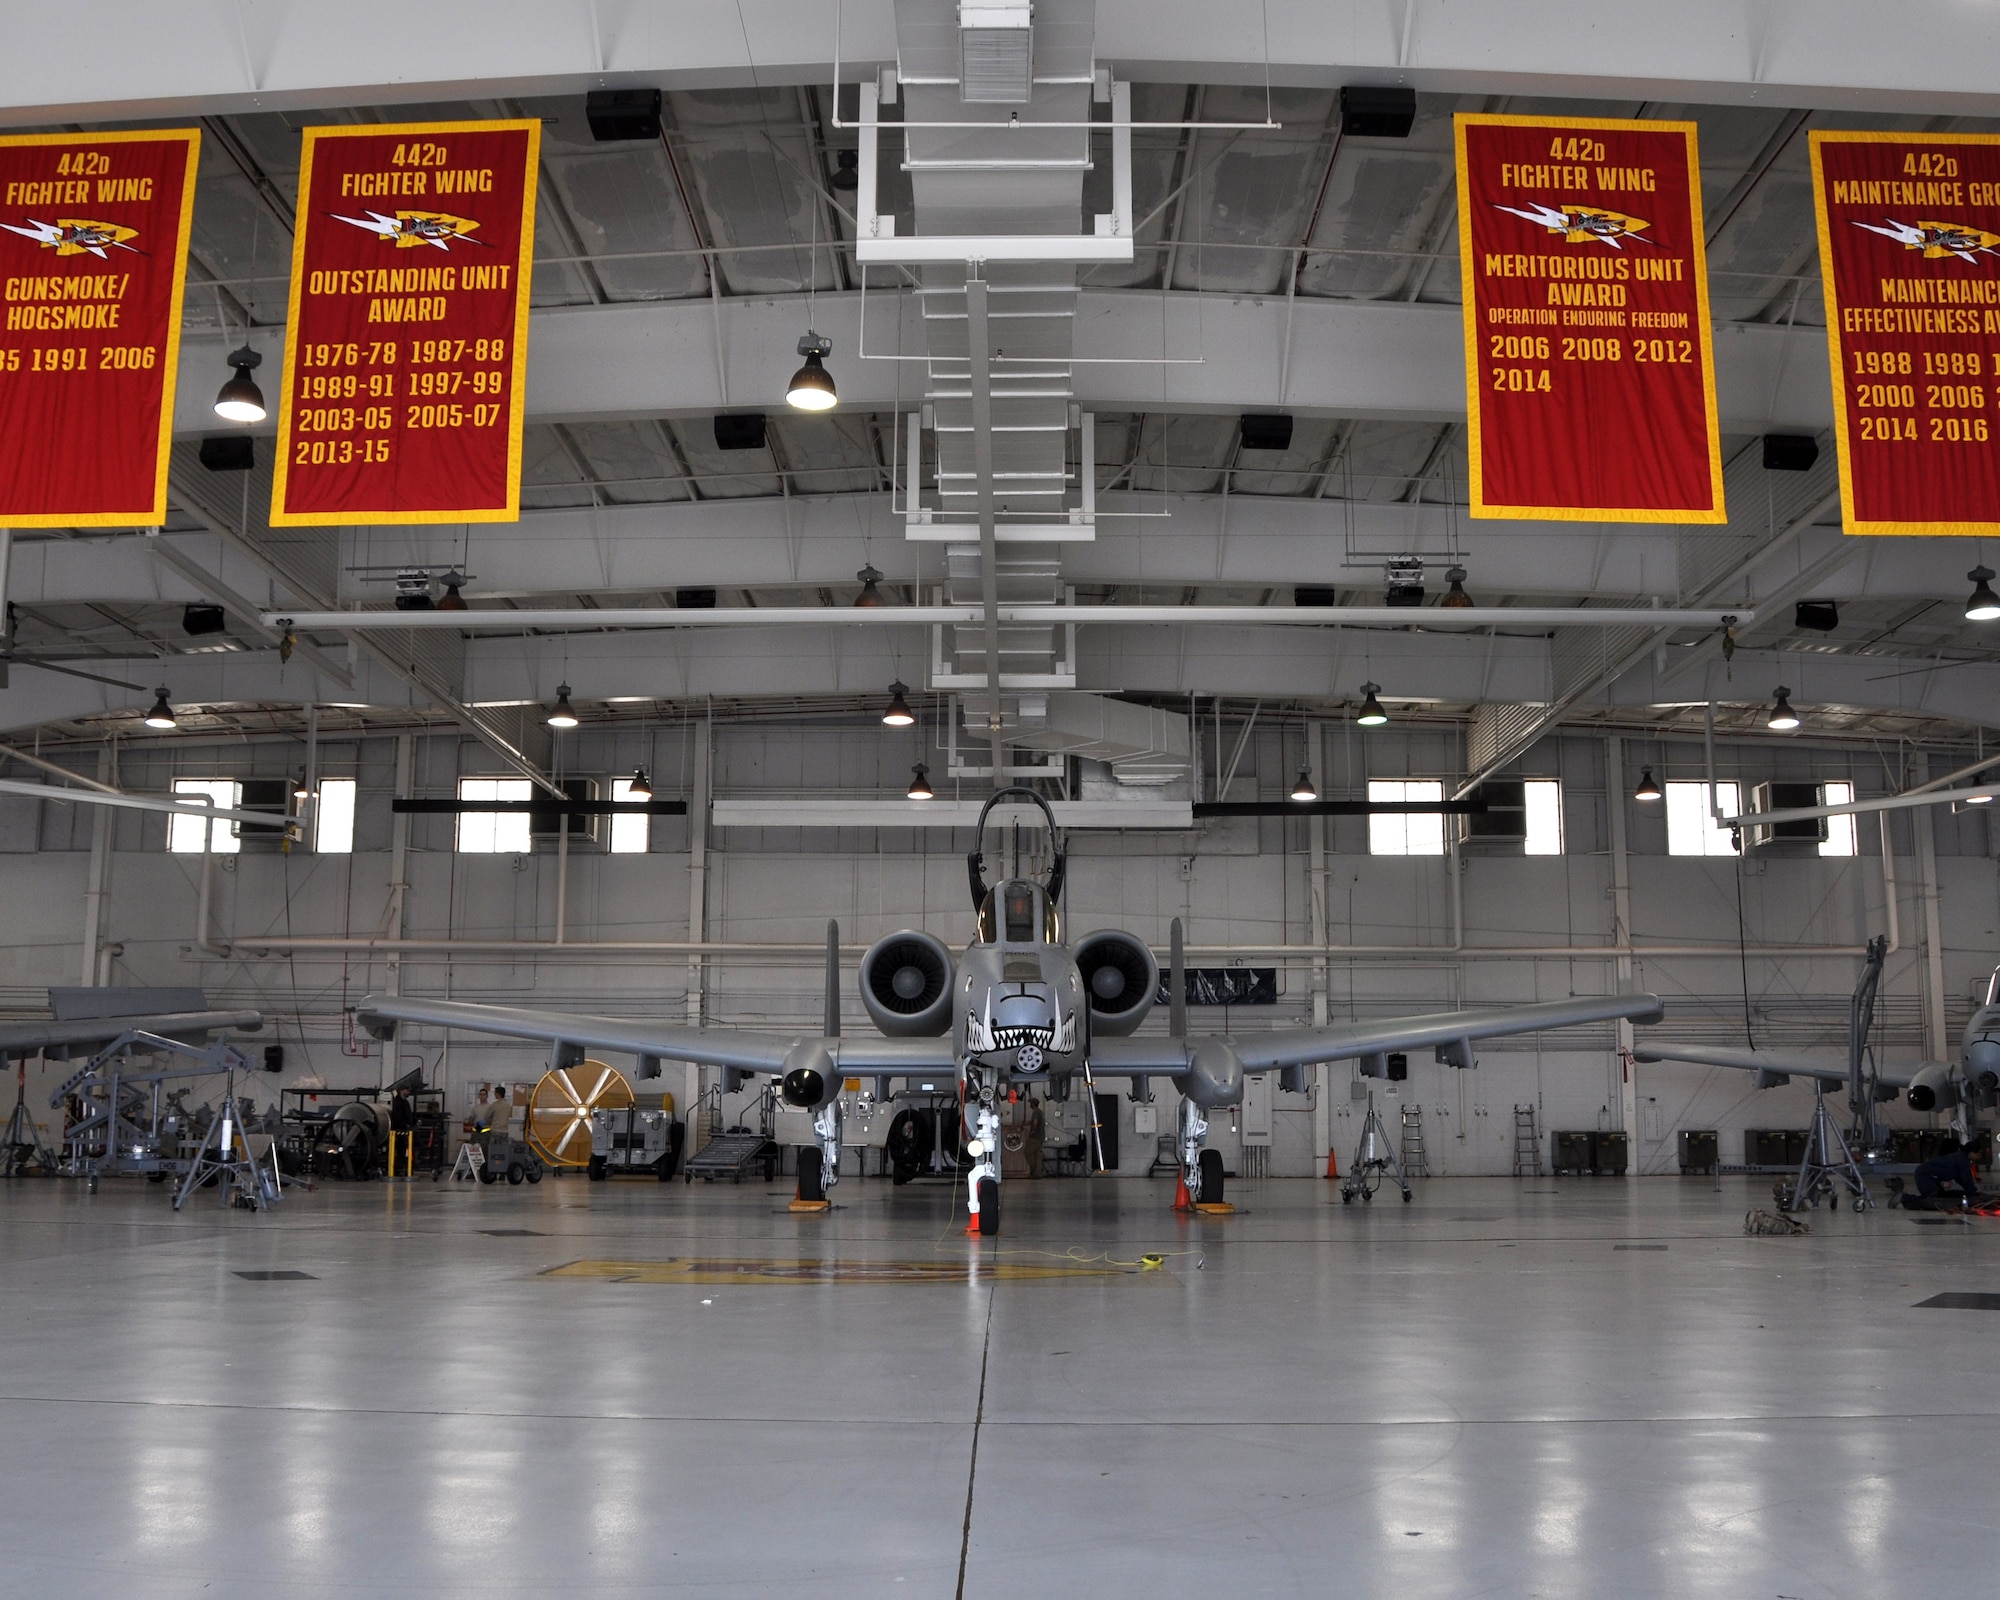 The 442d Maintenance Group at Whiteman Air Force Base, Mo., proudly display their litany of awards in the "5-Bay," their primary maintenance hanger. 442d maintainers have, in one form or another, won the Maintenance Effectiveness Award (Medium Category) at the Major Command level three years running.